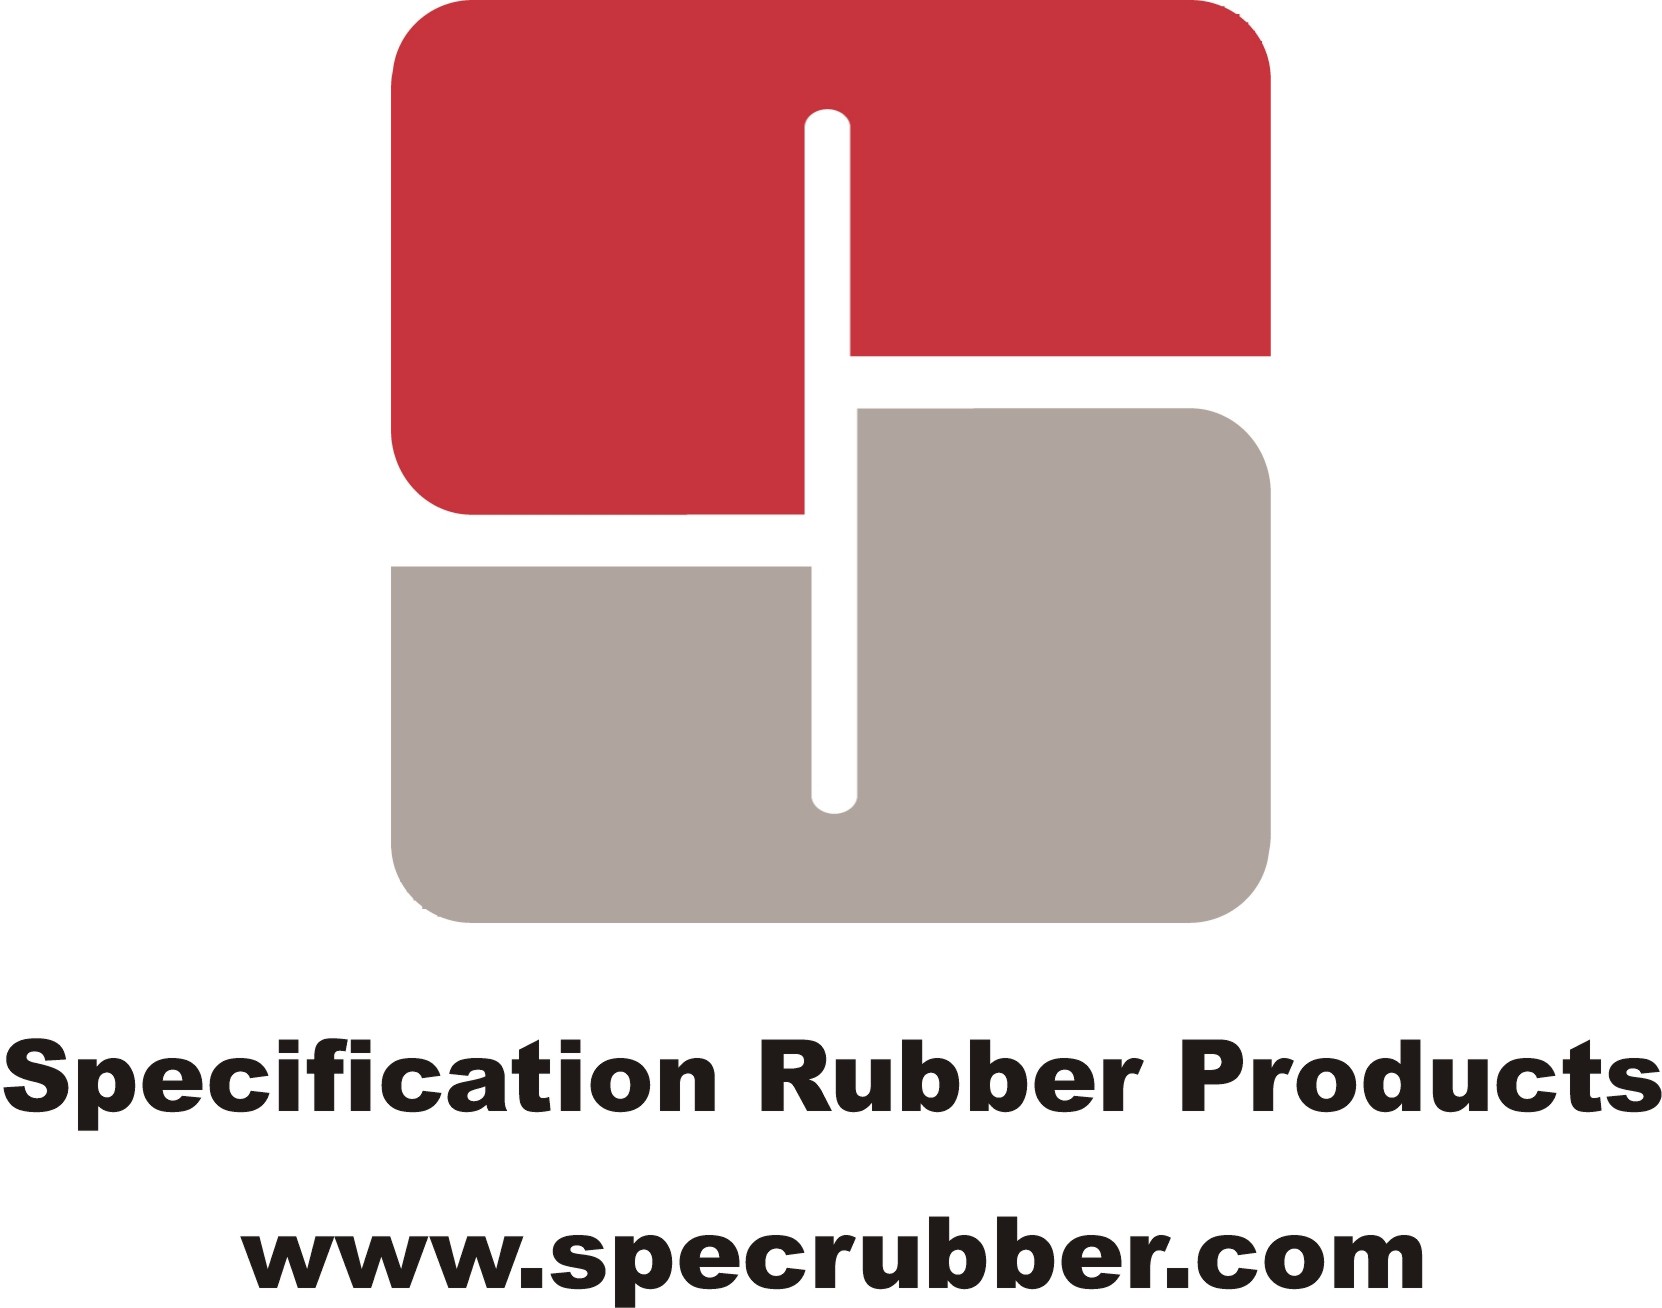 Specification Rubber